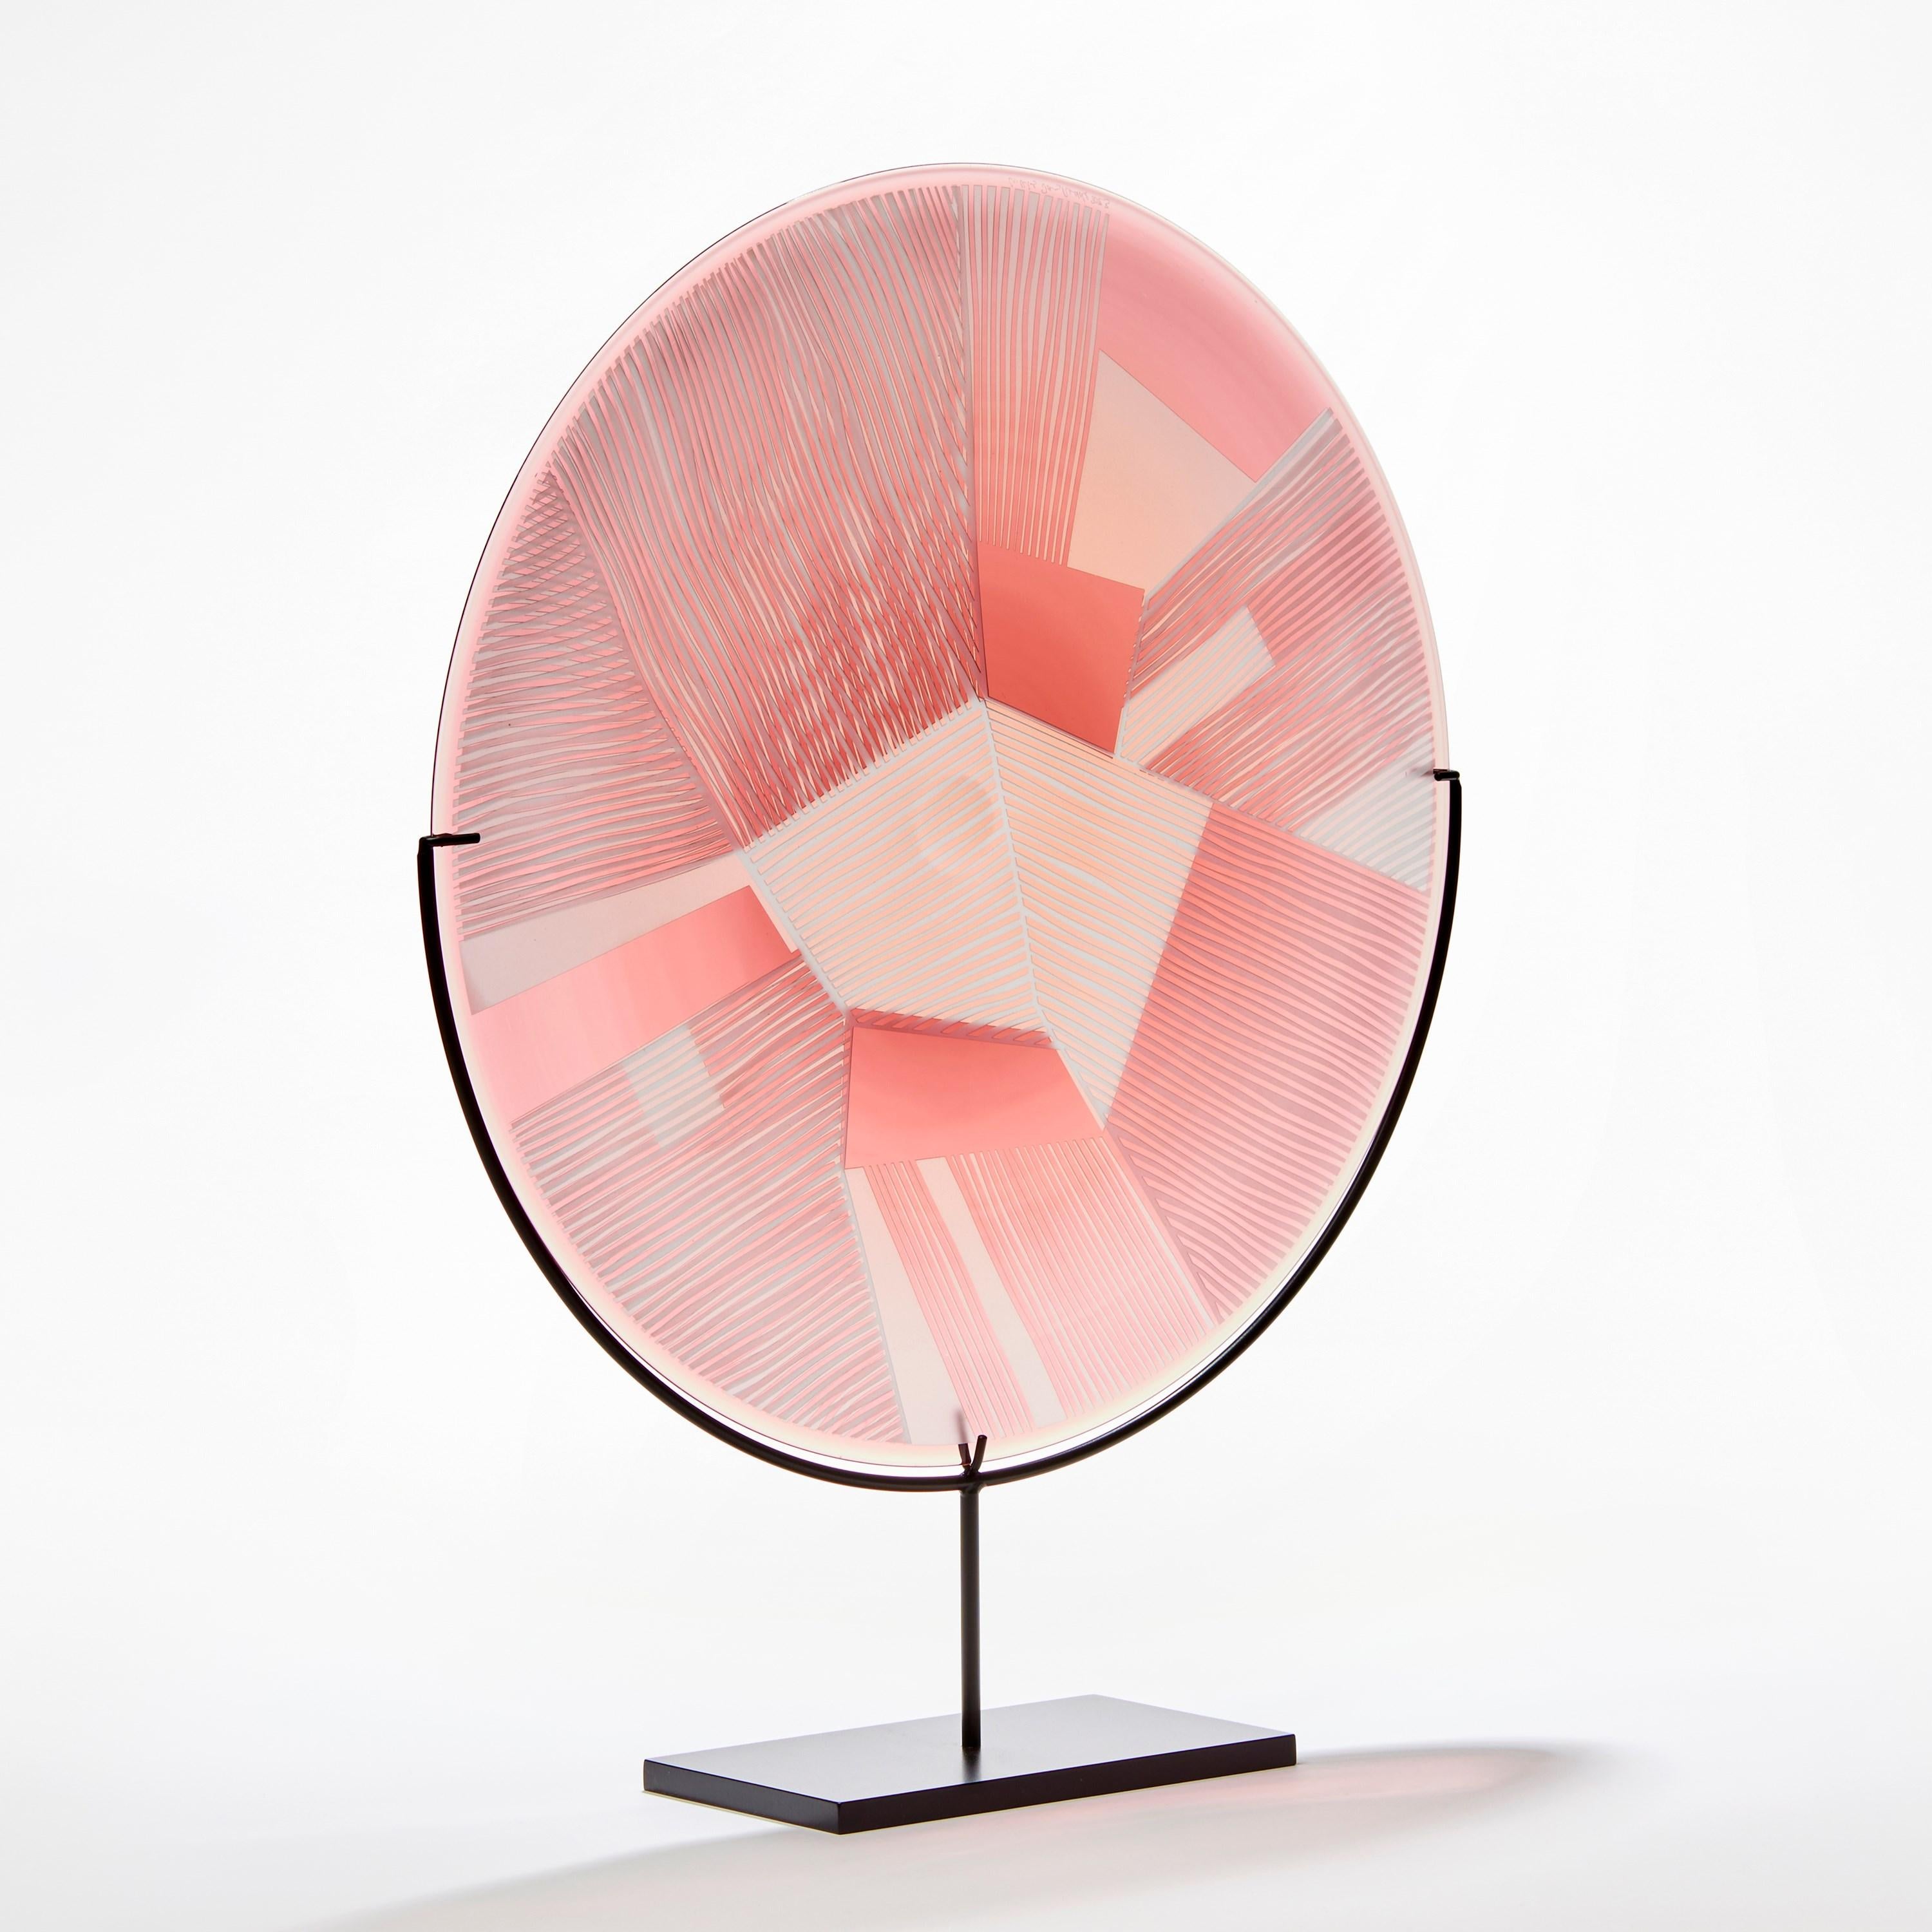 Organic Modern Overlay Fields in Heliotrope over Pink, a mounted glass sculpture by Kate Jones